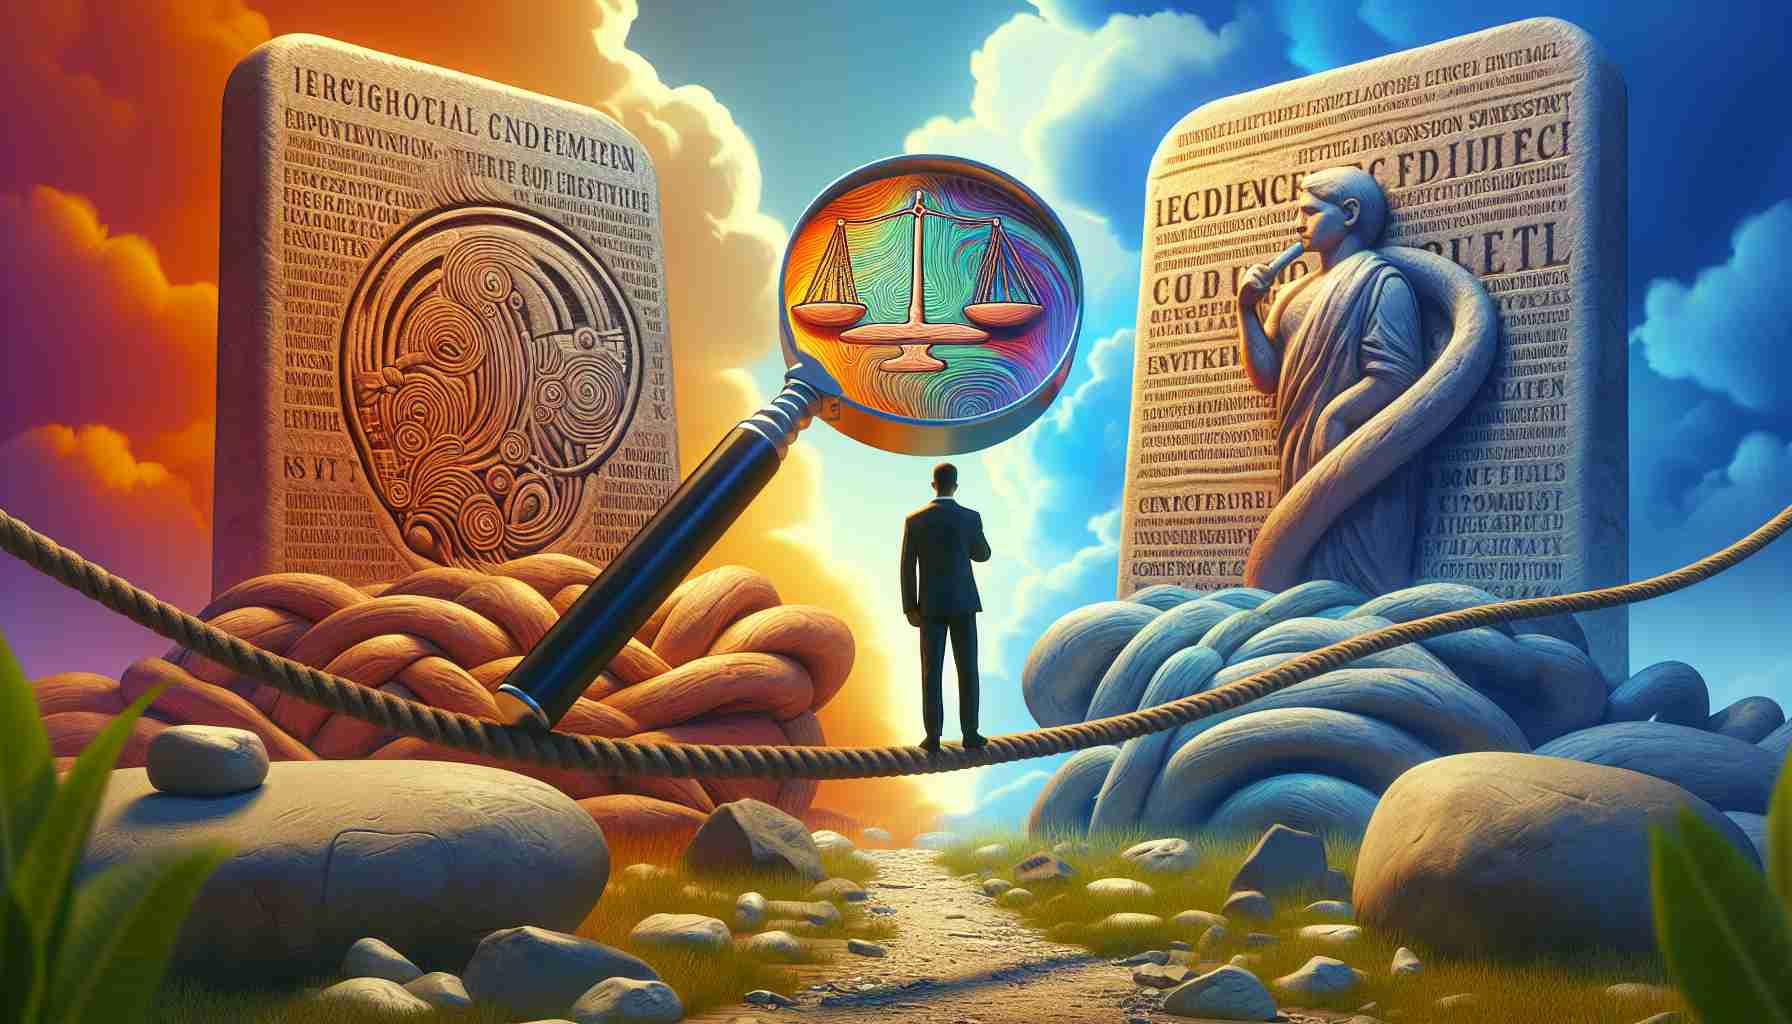 Generate a realistic HD image that symbolically represents the exploration of ethical dilemmas in contemporary society. The scene could include a magnifying glass scrutinizing an abstract representation of various ethical codes, a thoughtful individual contemplating on a tight rope between two strong opposing value systems (depicted as two giant stone tablets with inscriptions, for example), and a path winding between symbols associated with modern societal challenges such as technology, environment, and power. Use vibrant colors and a realistic style to convey the gravity of the subject.